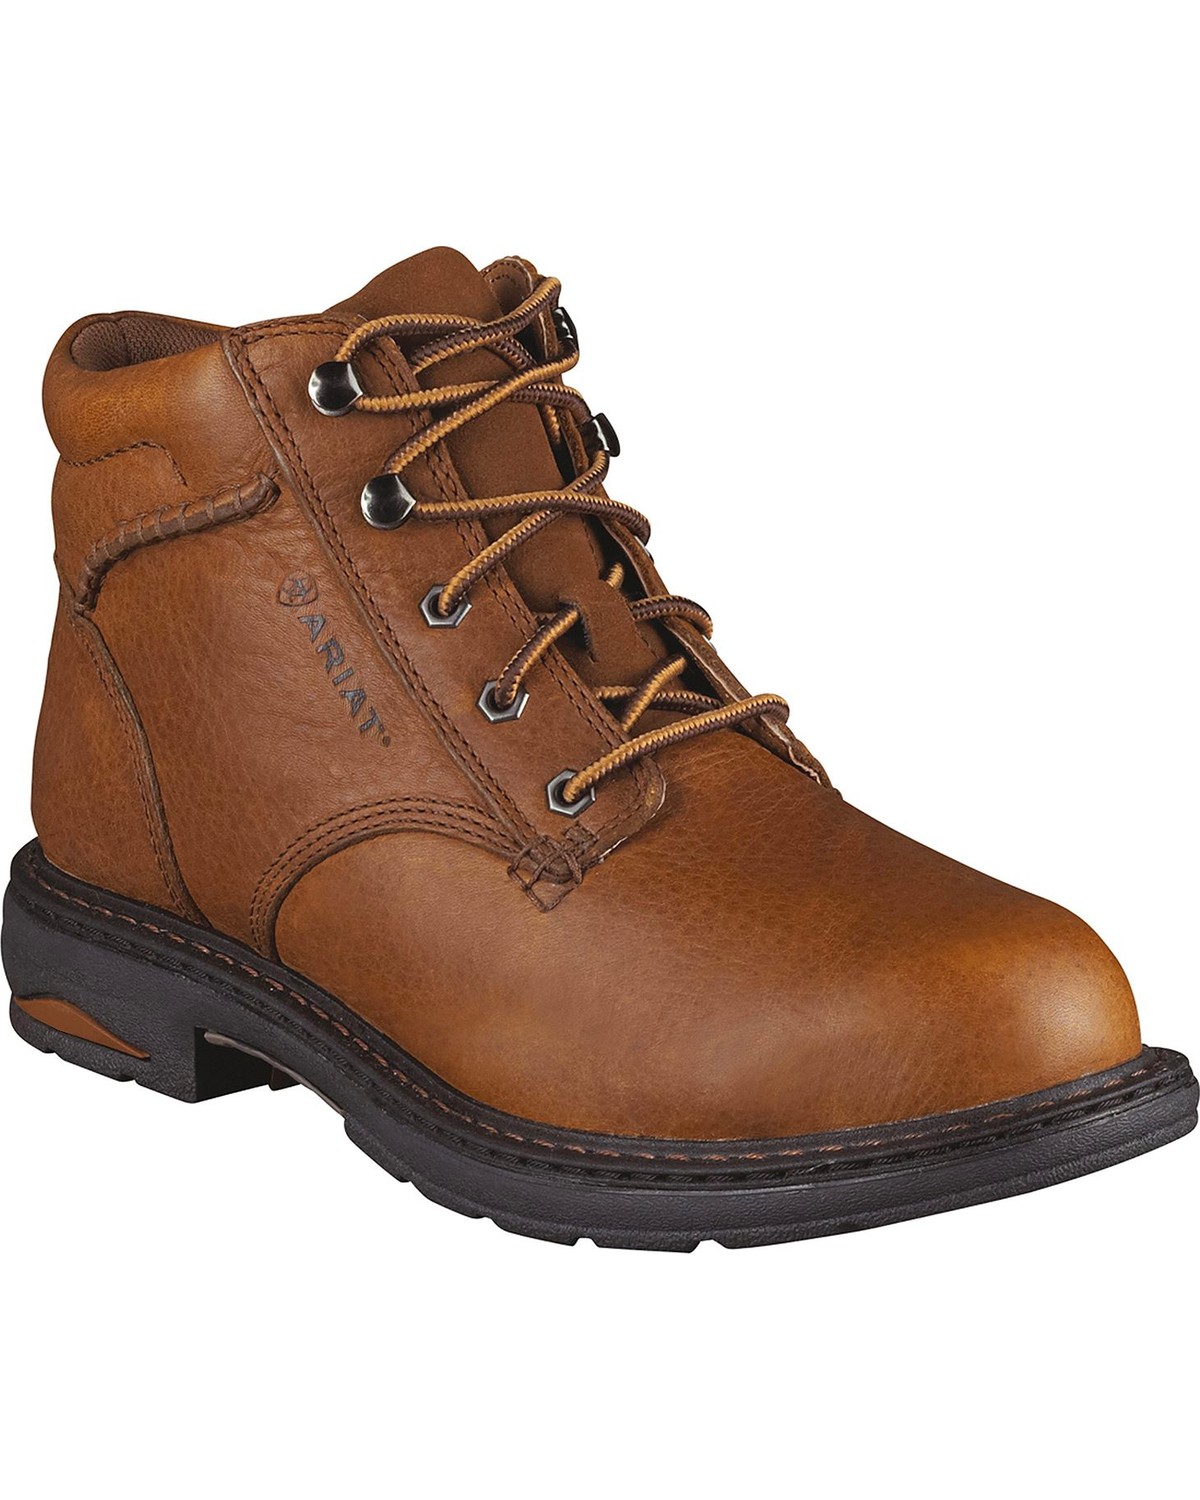 leather womens work boots